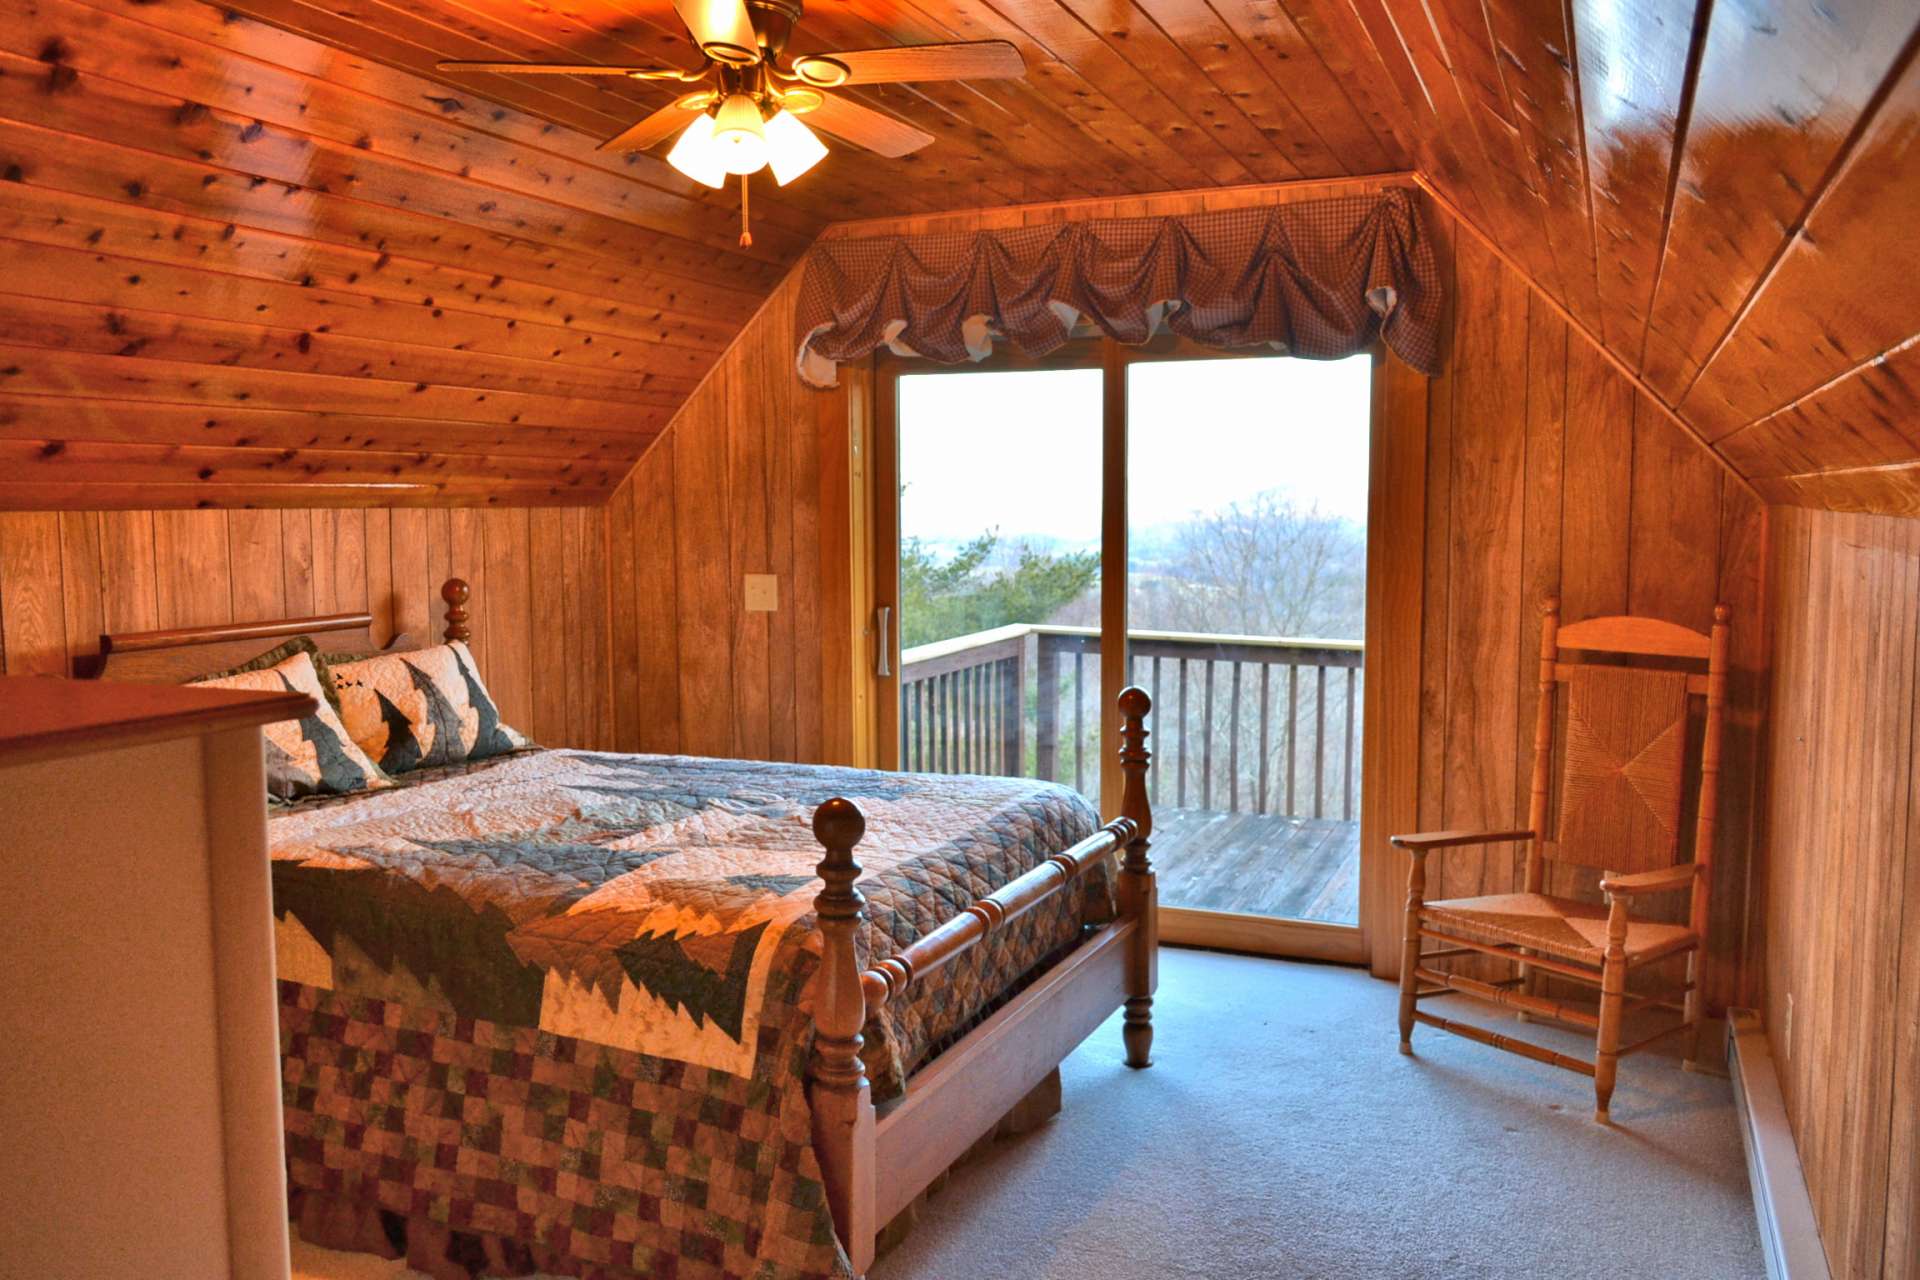 The upper level offers the master suite with private bath and access to a private balcony.